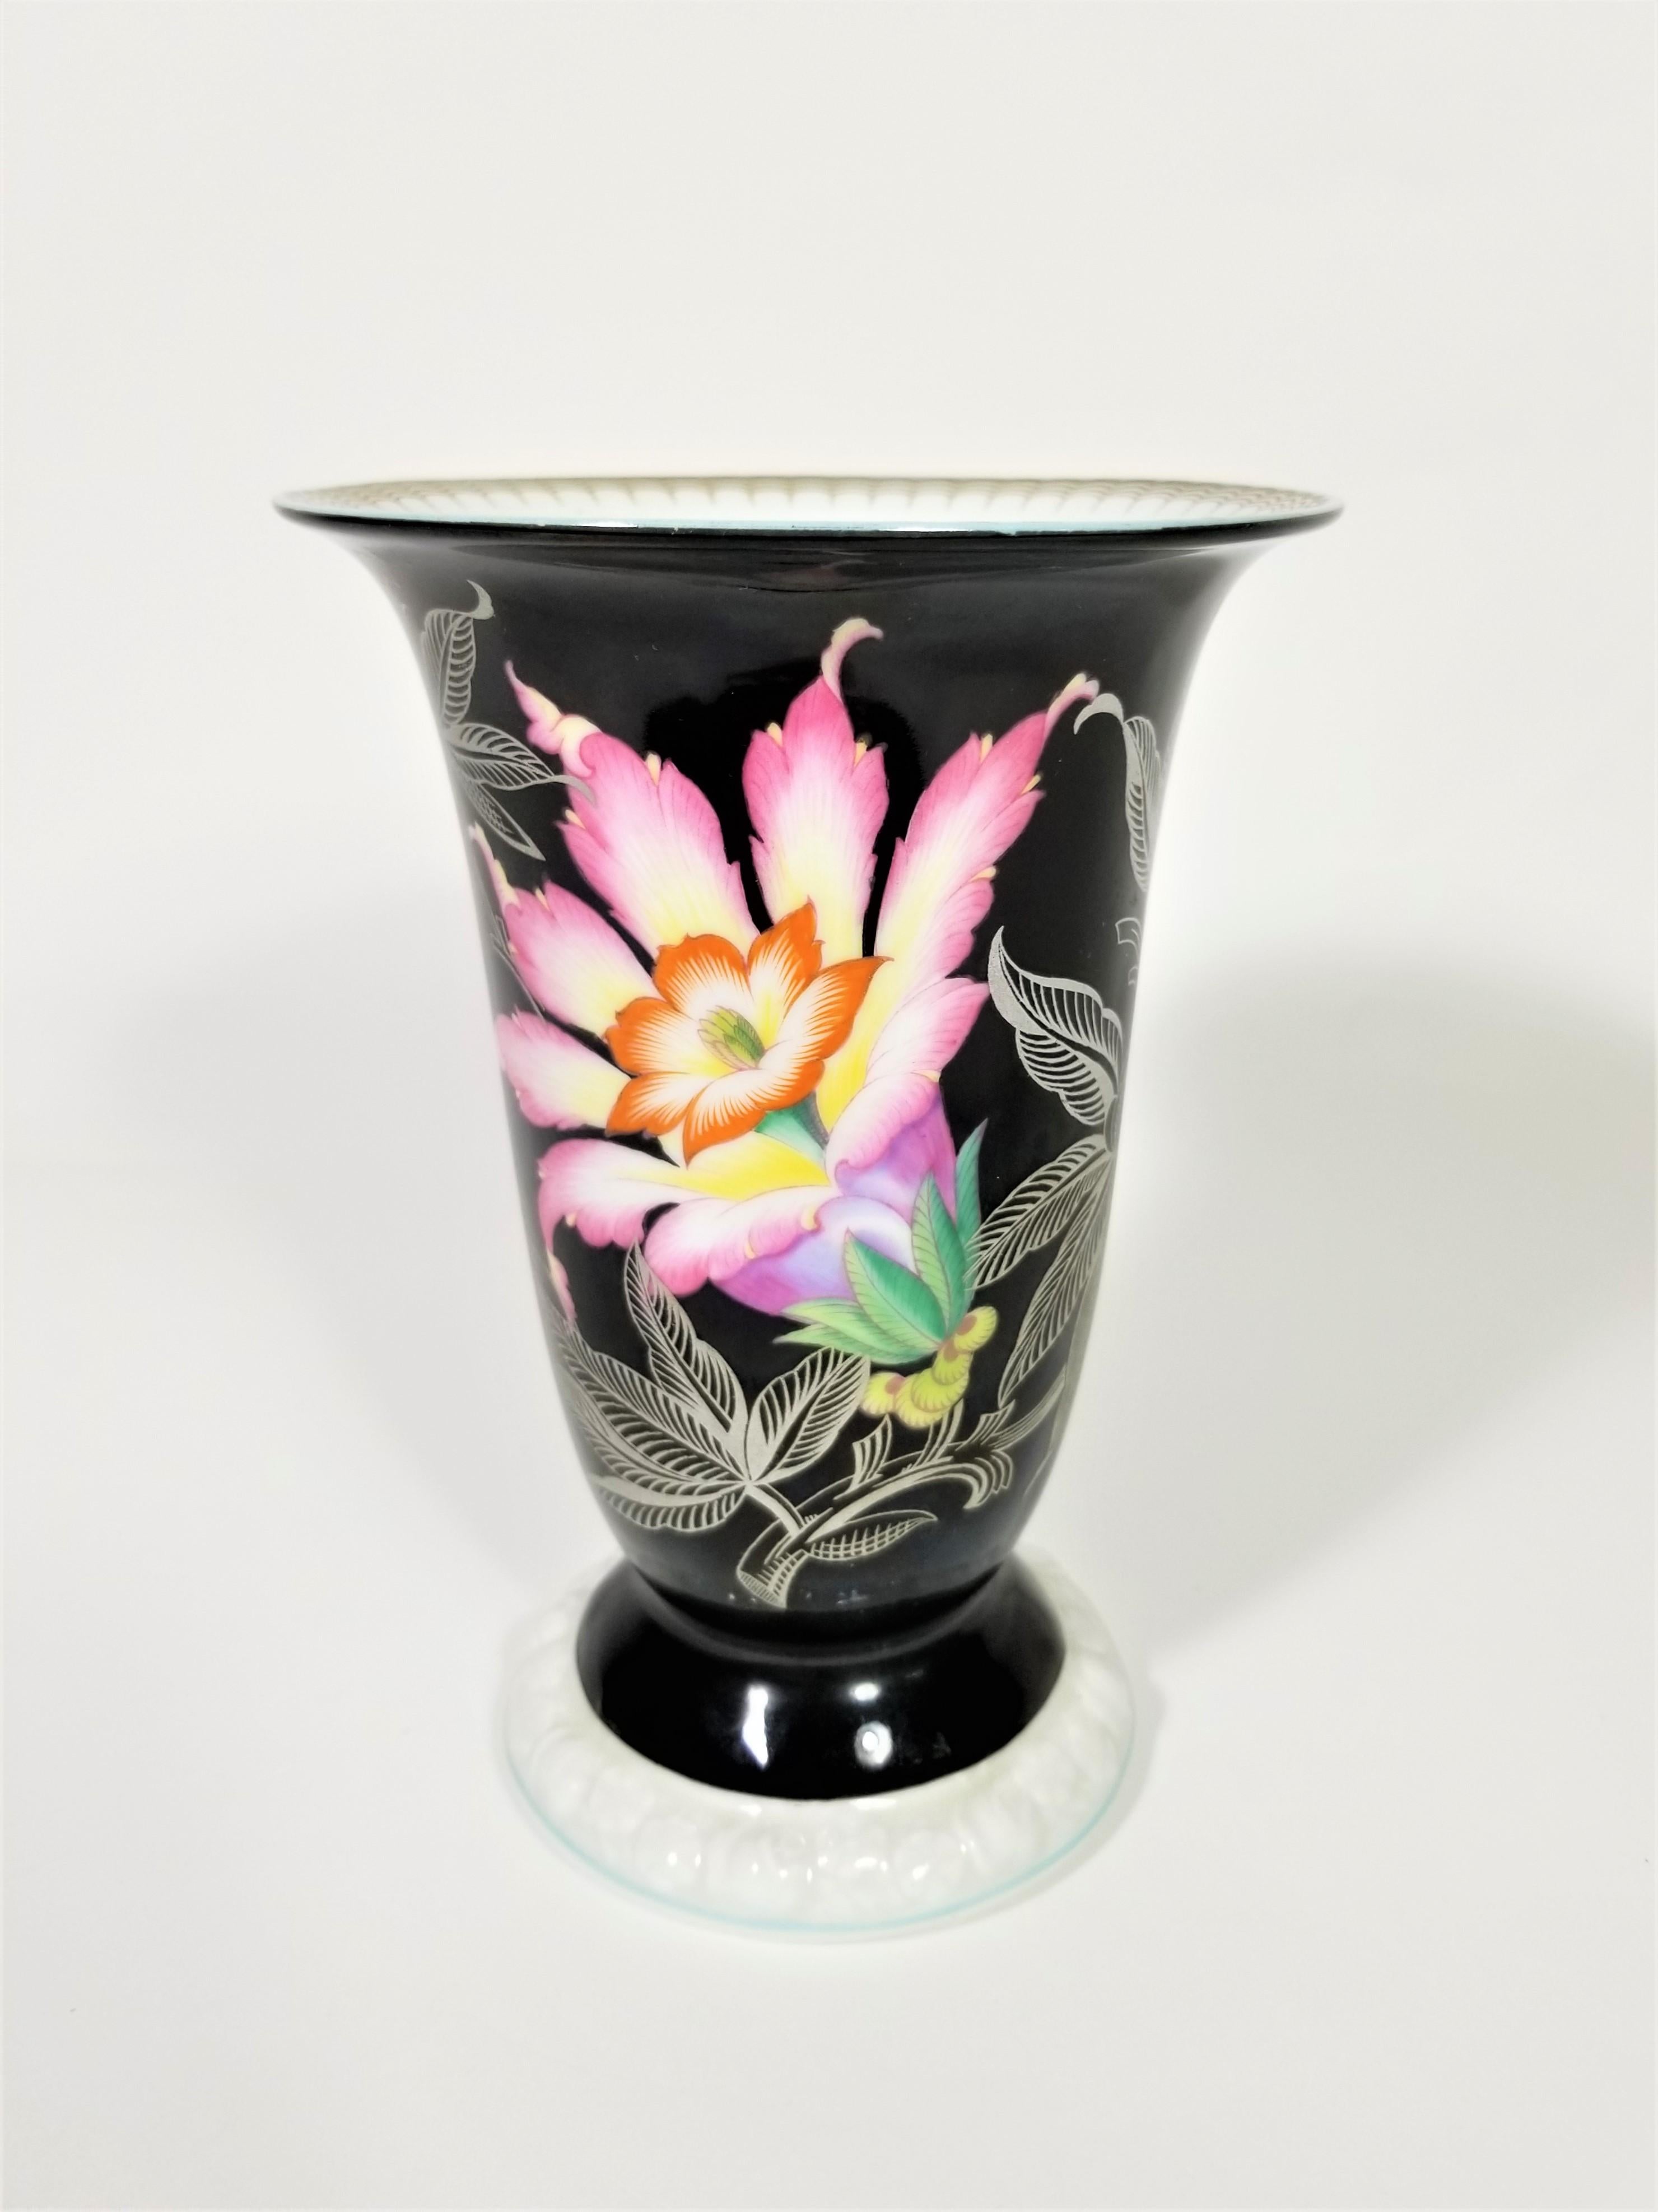 Lovely porcelain vase signed Heinrich H & G Selb vase. Black exterior with brightly colored flower and silver accents. White interior. Made in Germany.
Excellent condition.

Measurements:
Height 7.5 inches
Diameter top 5.0 inches
Diameter